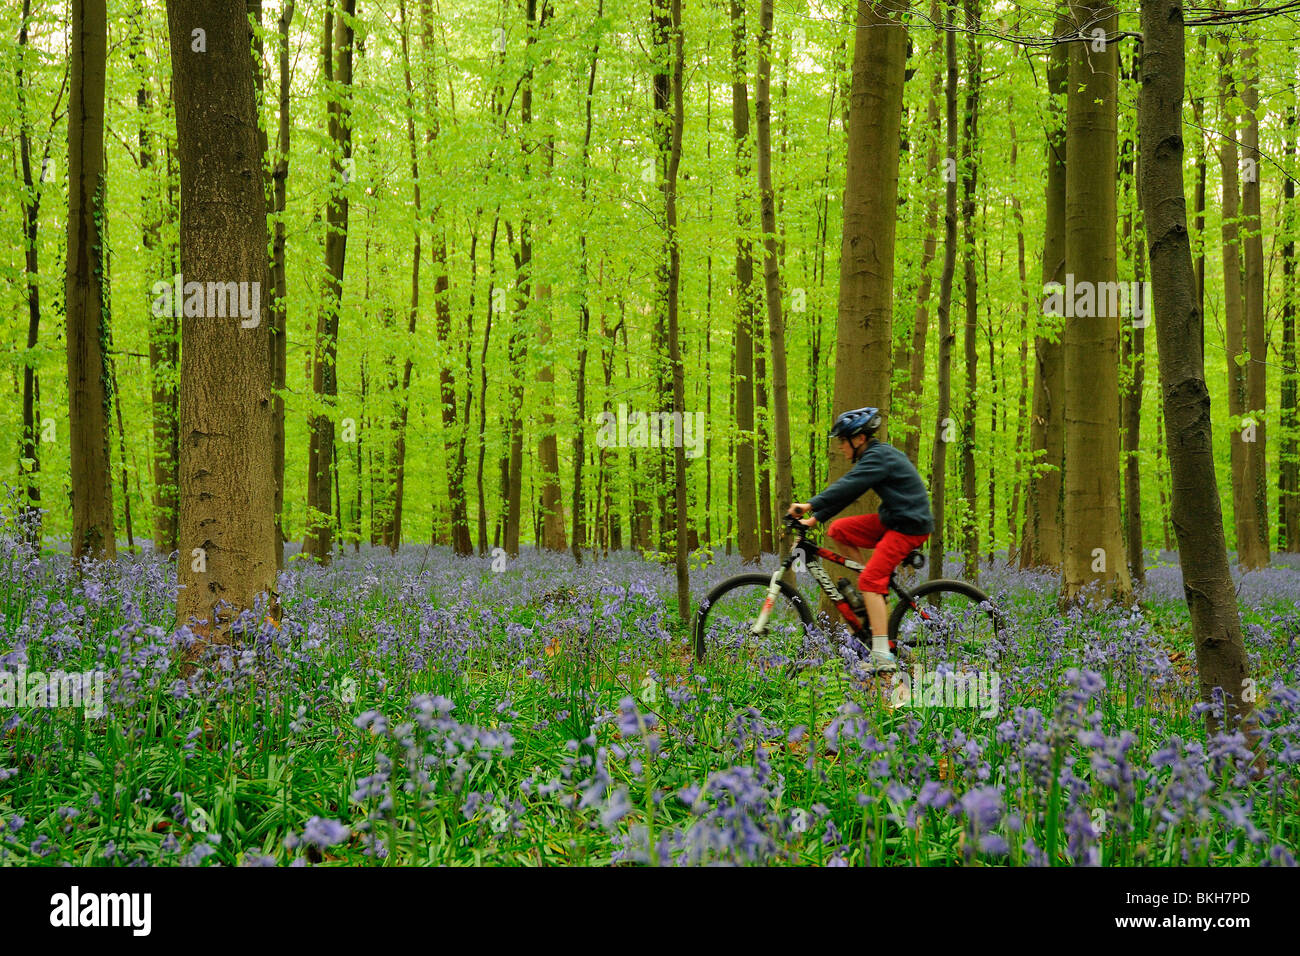 Kind fietst in bos; child cycles in forest Stock Photo